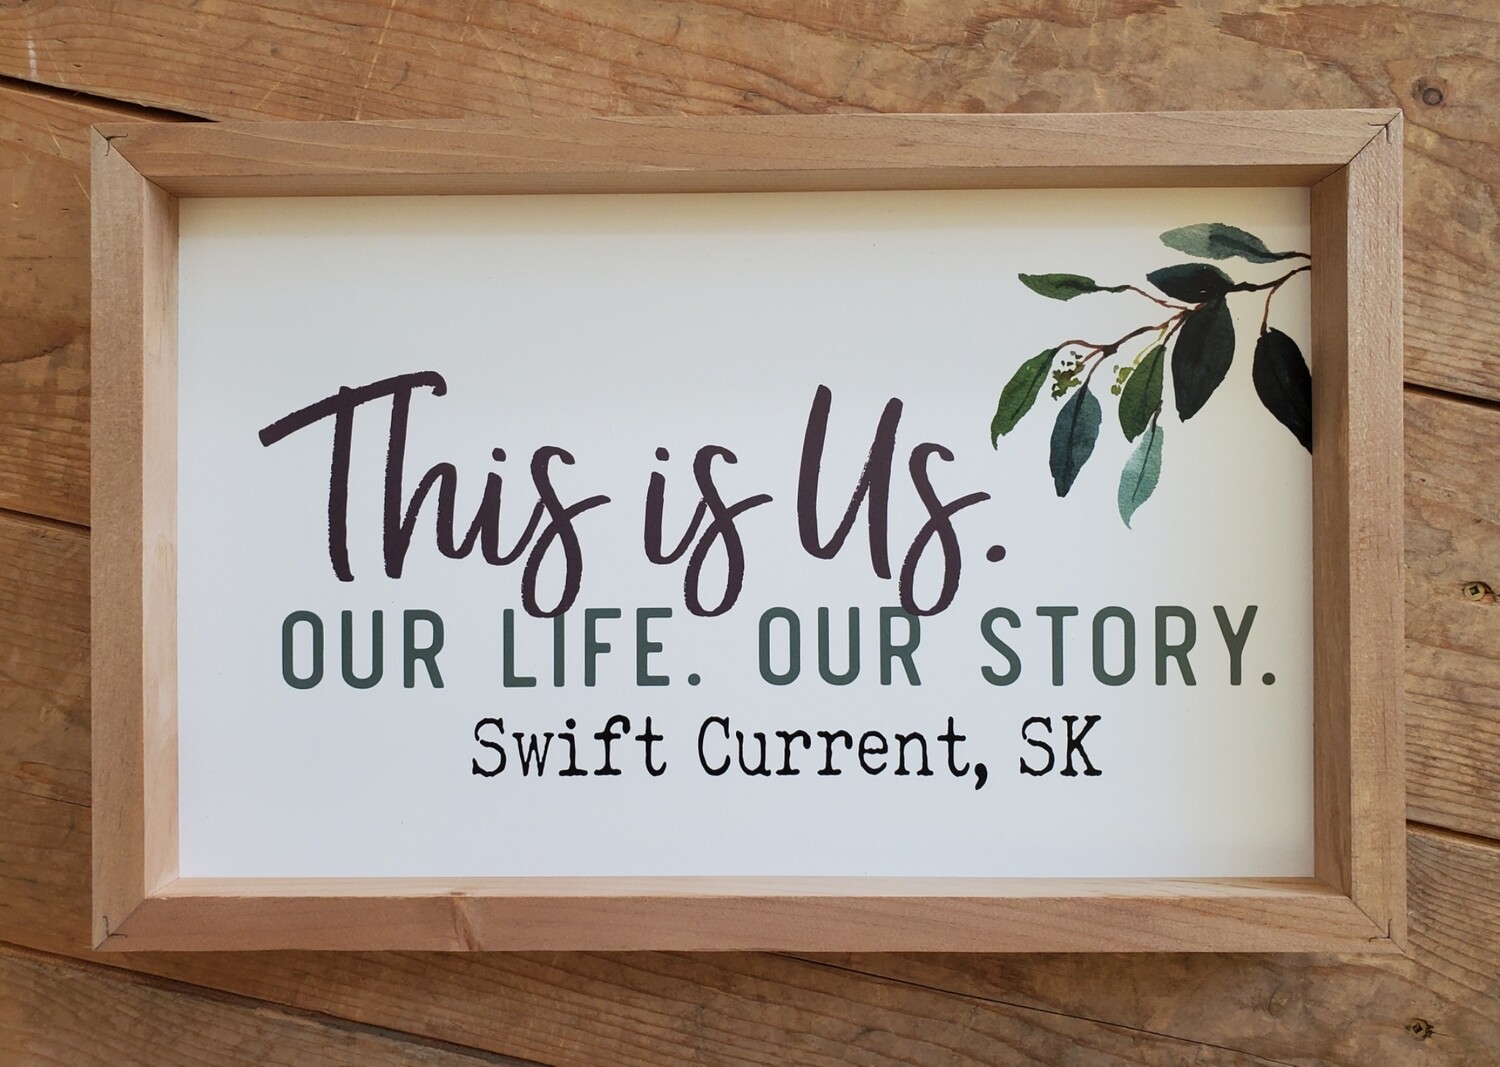 "This is Us. Our Life. Our Story. - Swift Current, SK" Wood Framed Sign